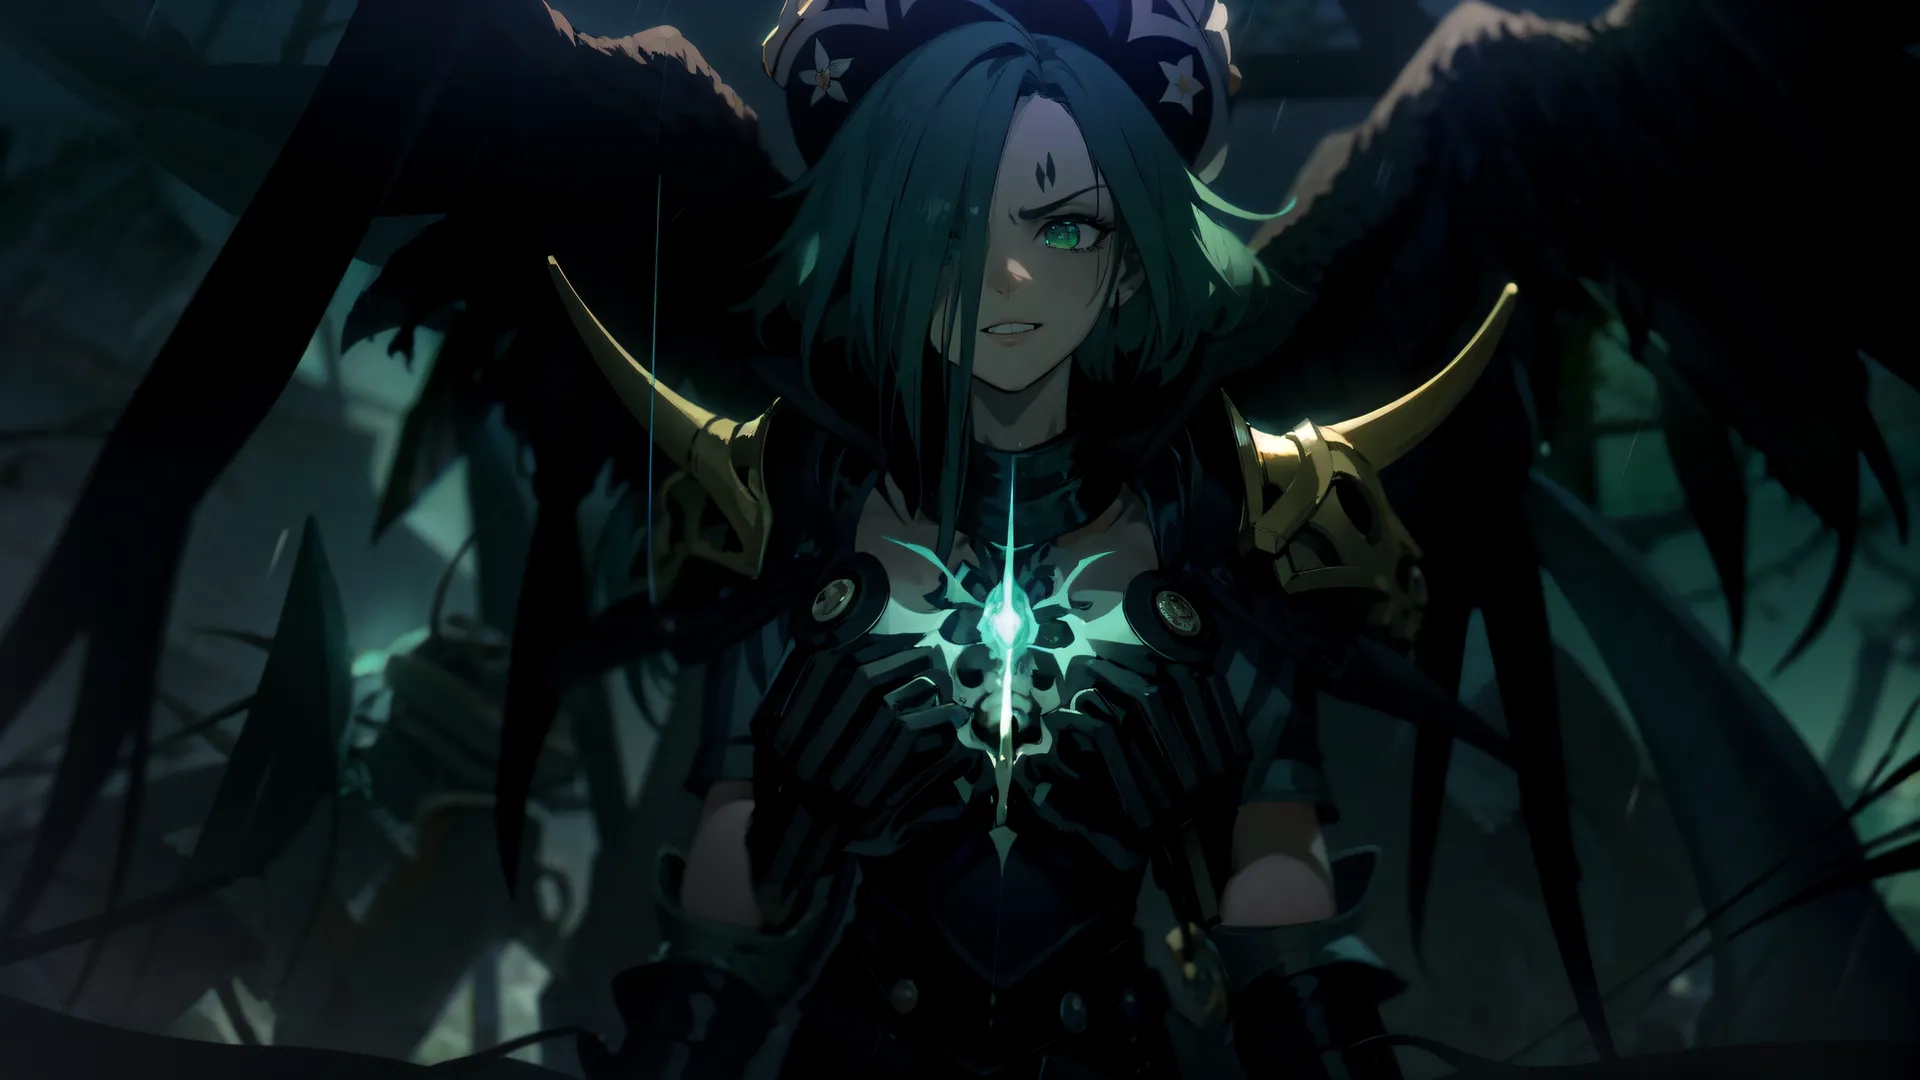 a girl with green hair and black eye makeup holding a glowing cross piece standing in the air by her neck wings and head pieces behind her
